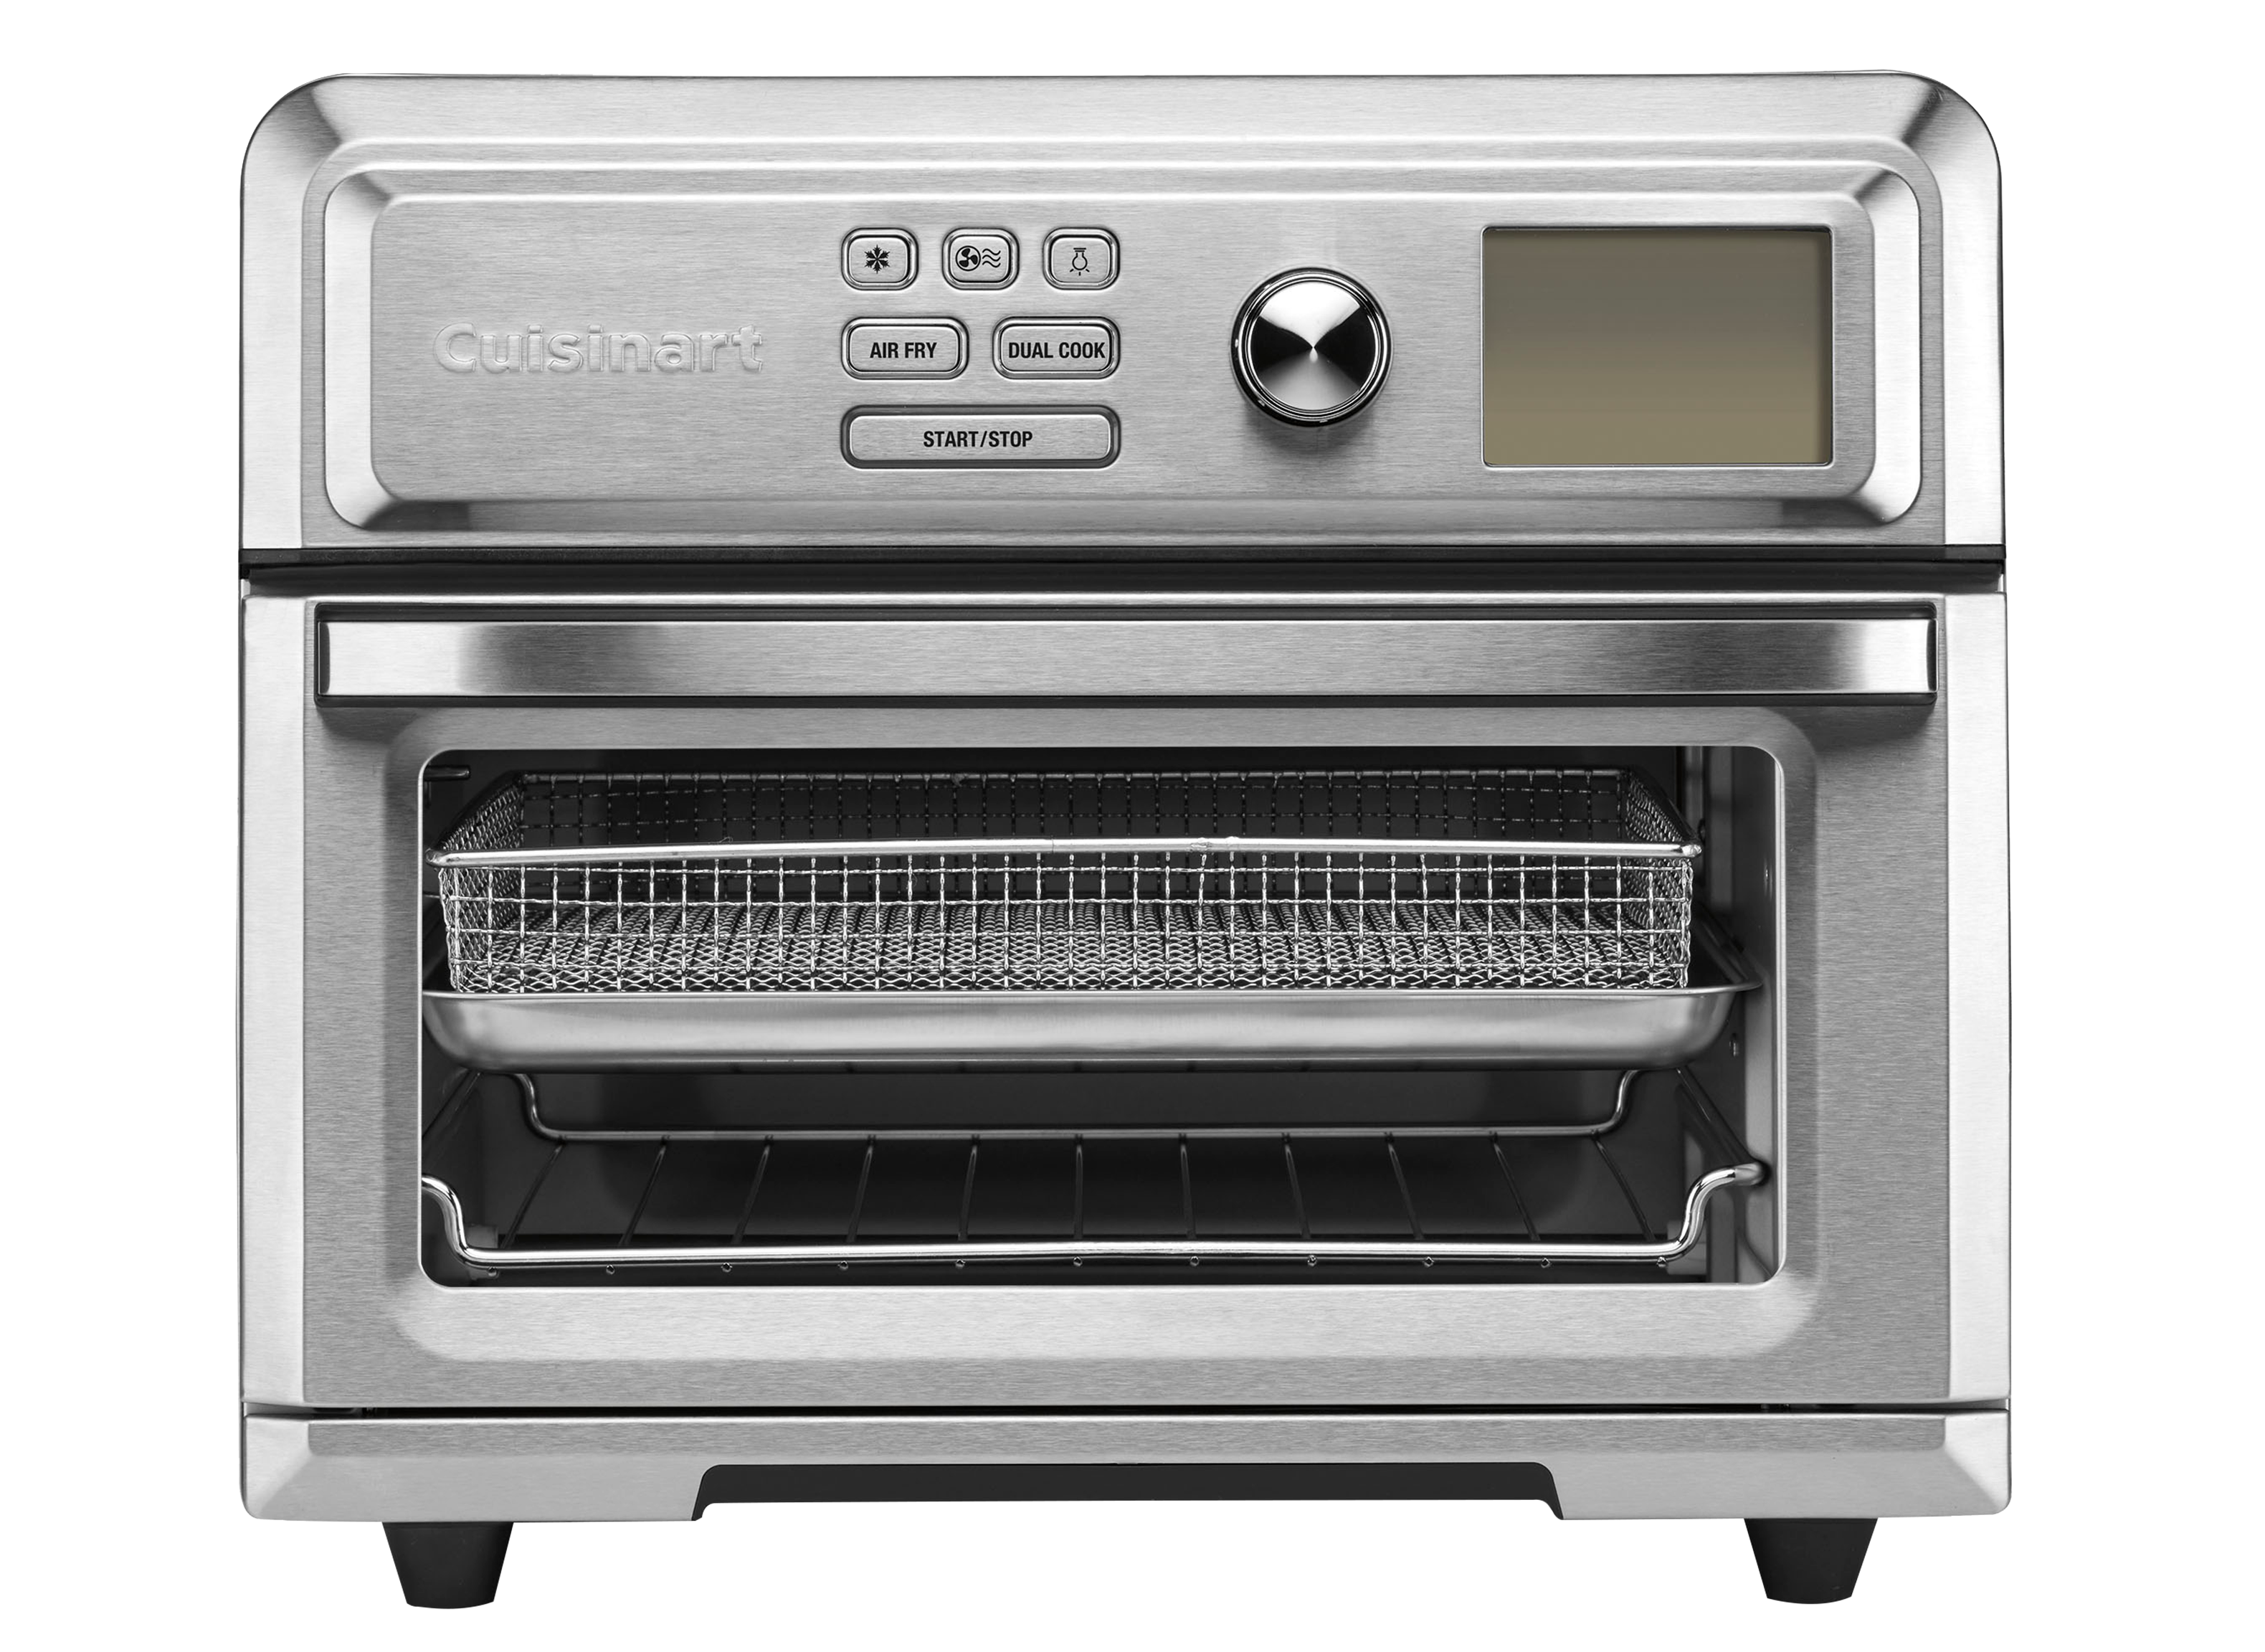 https://crdms.images.consumerreports.org/prod/products/cr/models/398537-toaster-ovens-cuisinart-toa-65-airfryer-toaster-oven-10004871.png